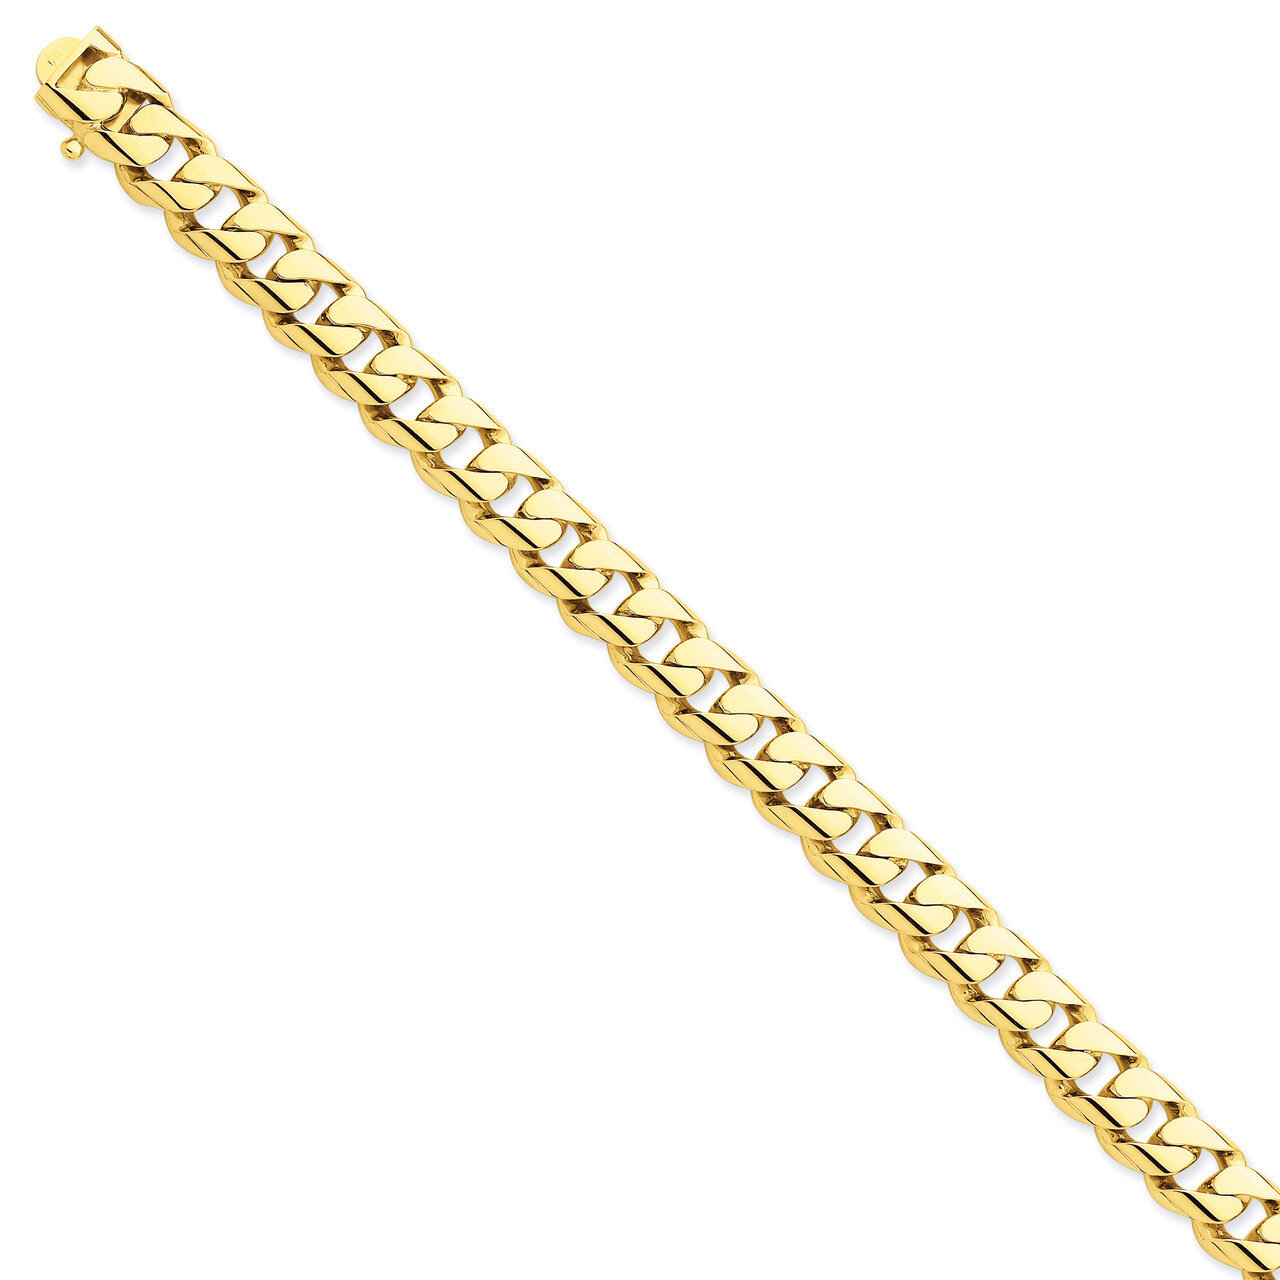 10mm Hand-polished Rounded Curb Chain 24 Inch 14k Gold LK126-24